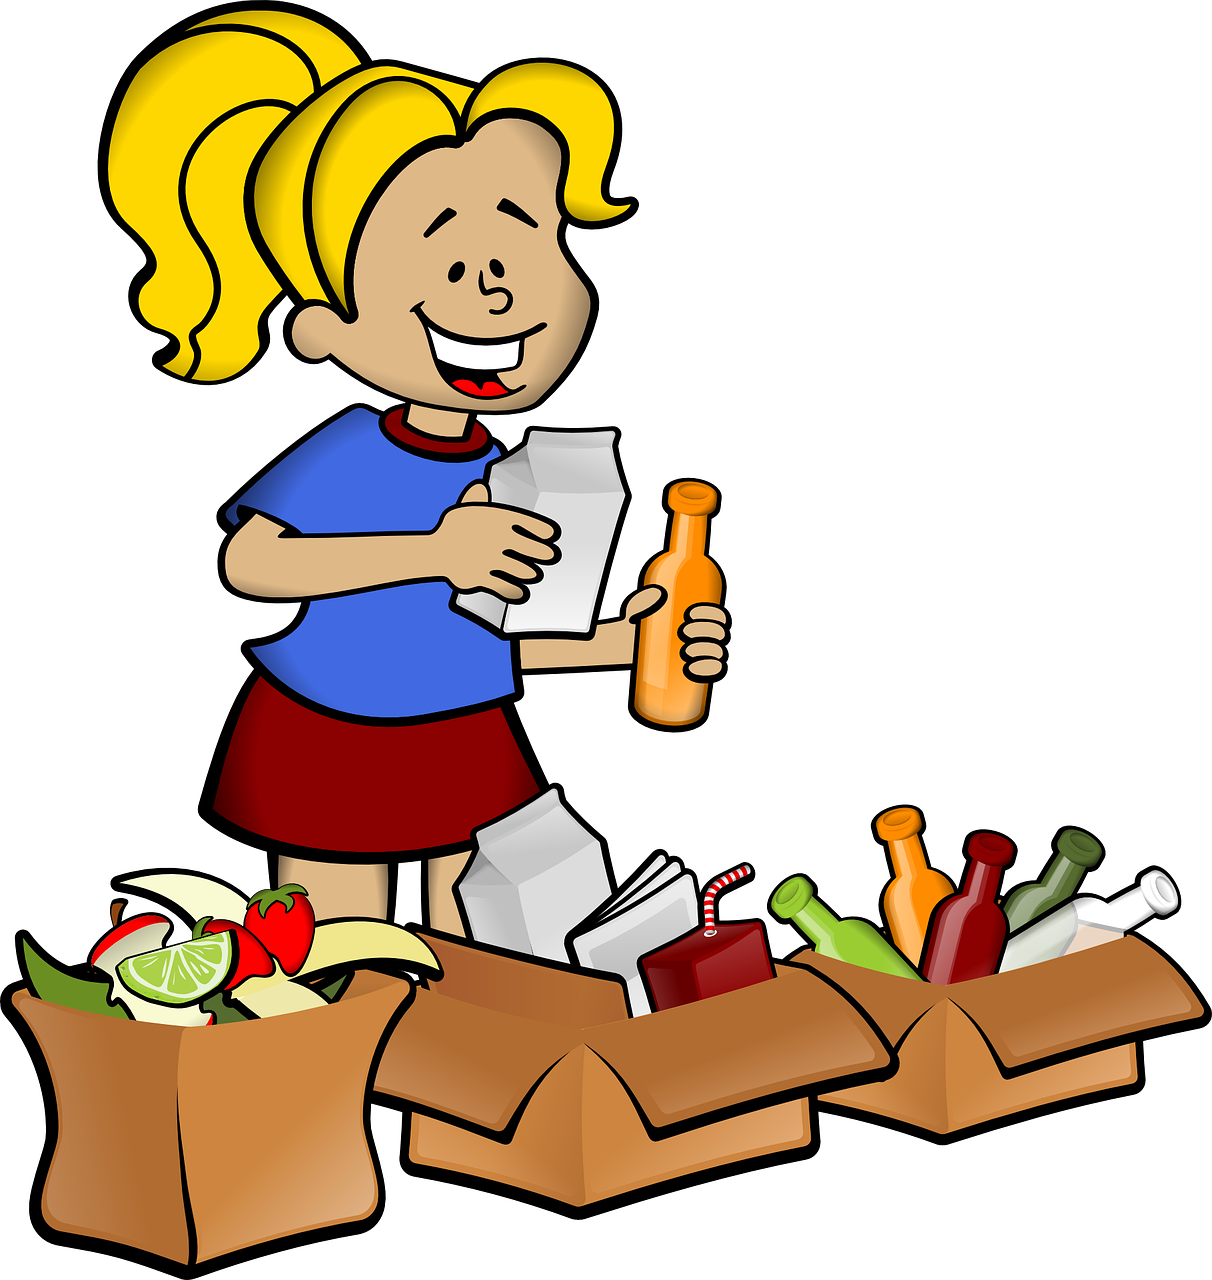 recycle, containers, girl-33605.jpg